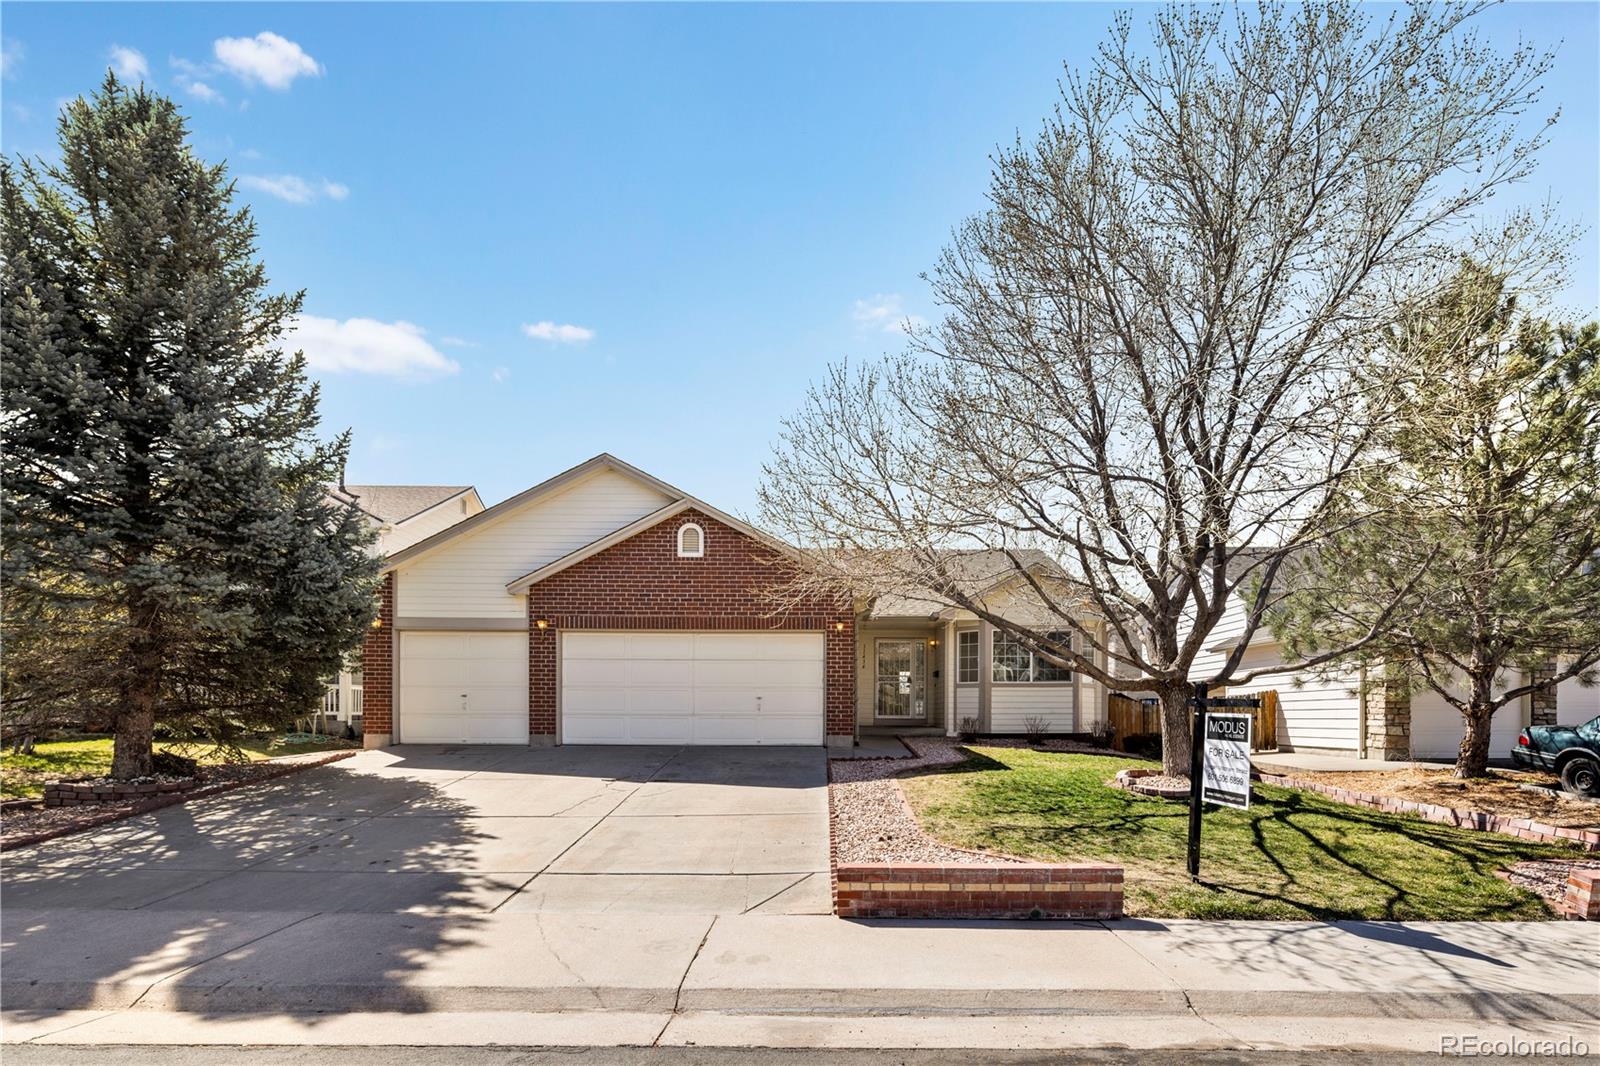 11434  River Run Circle, commerce city MLS: 3010350 Beds: 4 Baths: 3 Price: $529,000